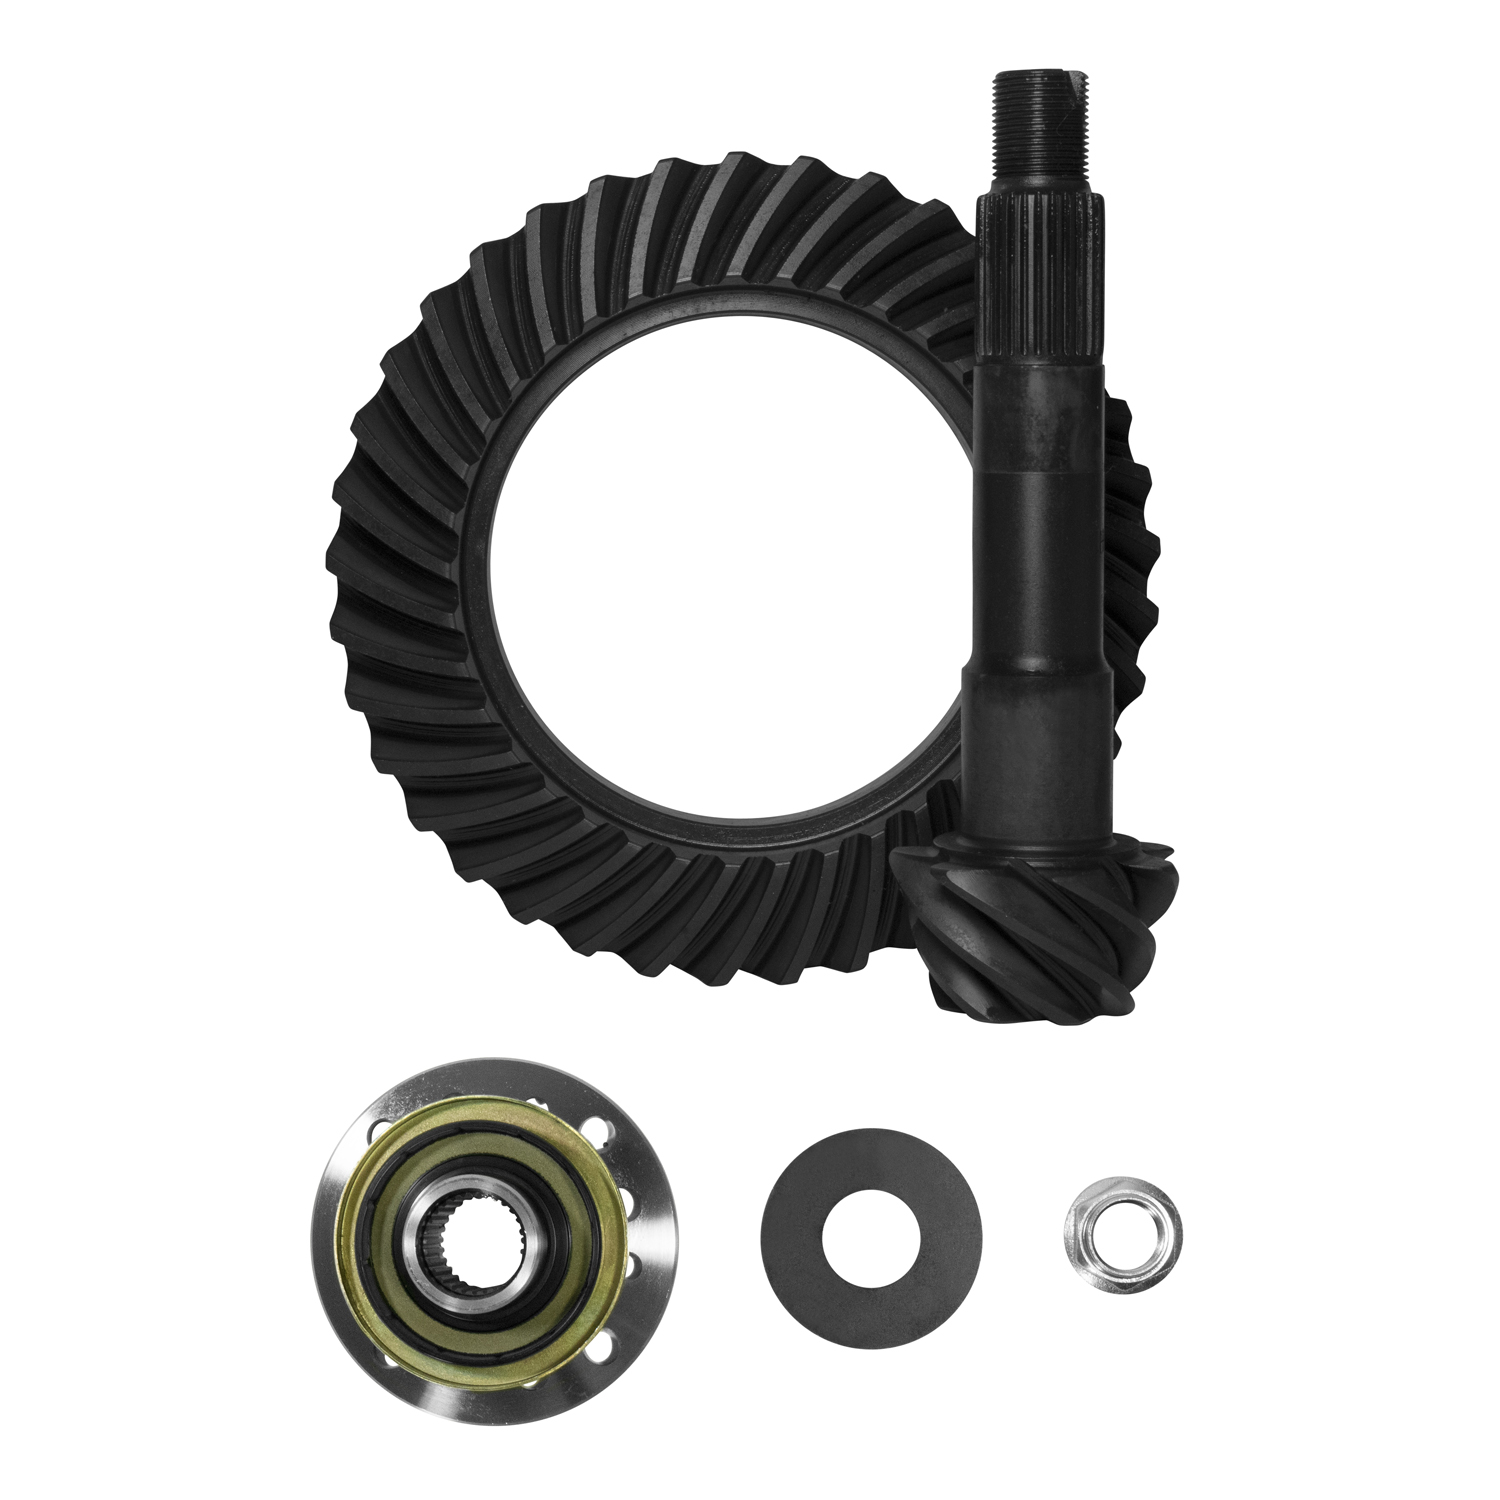 High performance Yukon Ring & Pinion gear set for Toyota 8" in a 4.88 ratio 